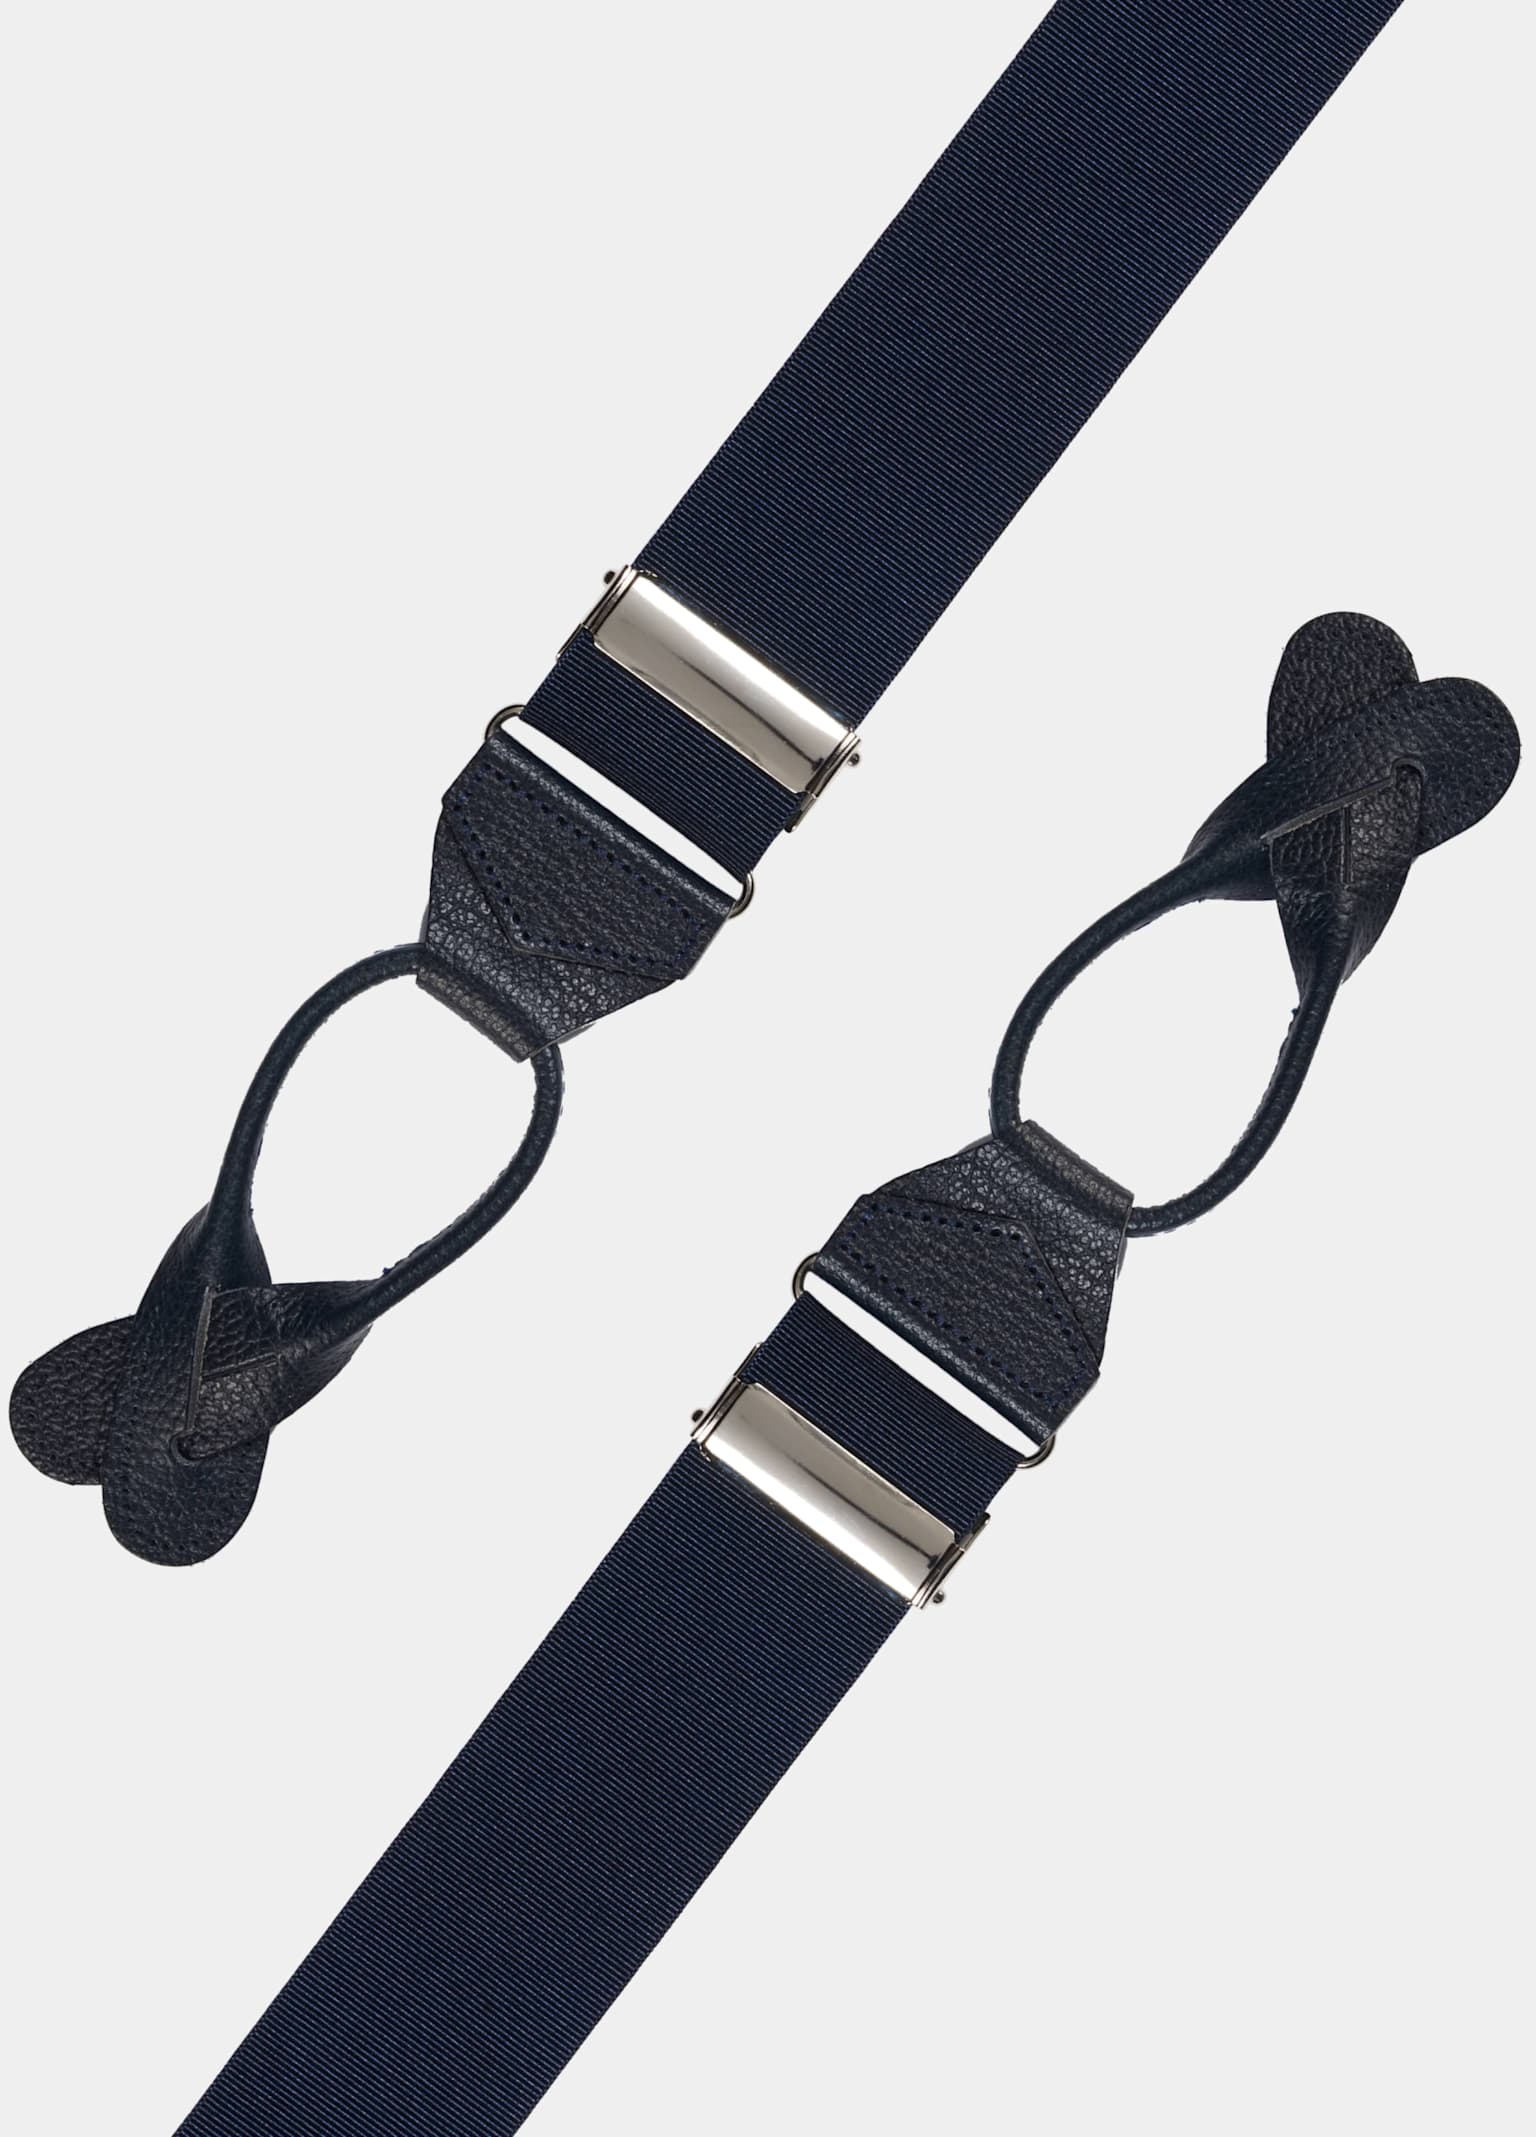 Suspenders with leather buckles.